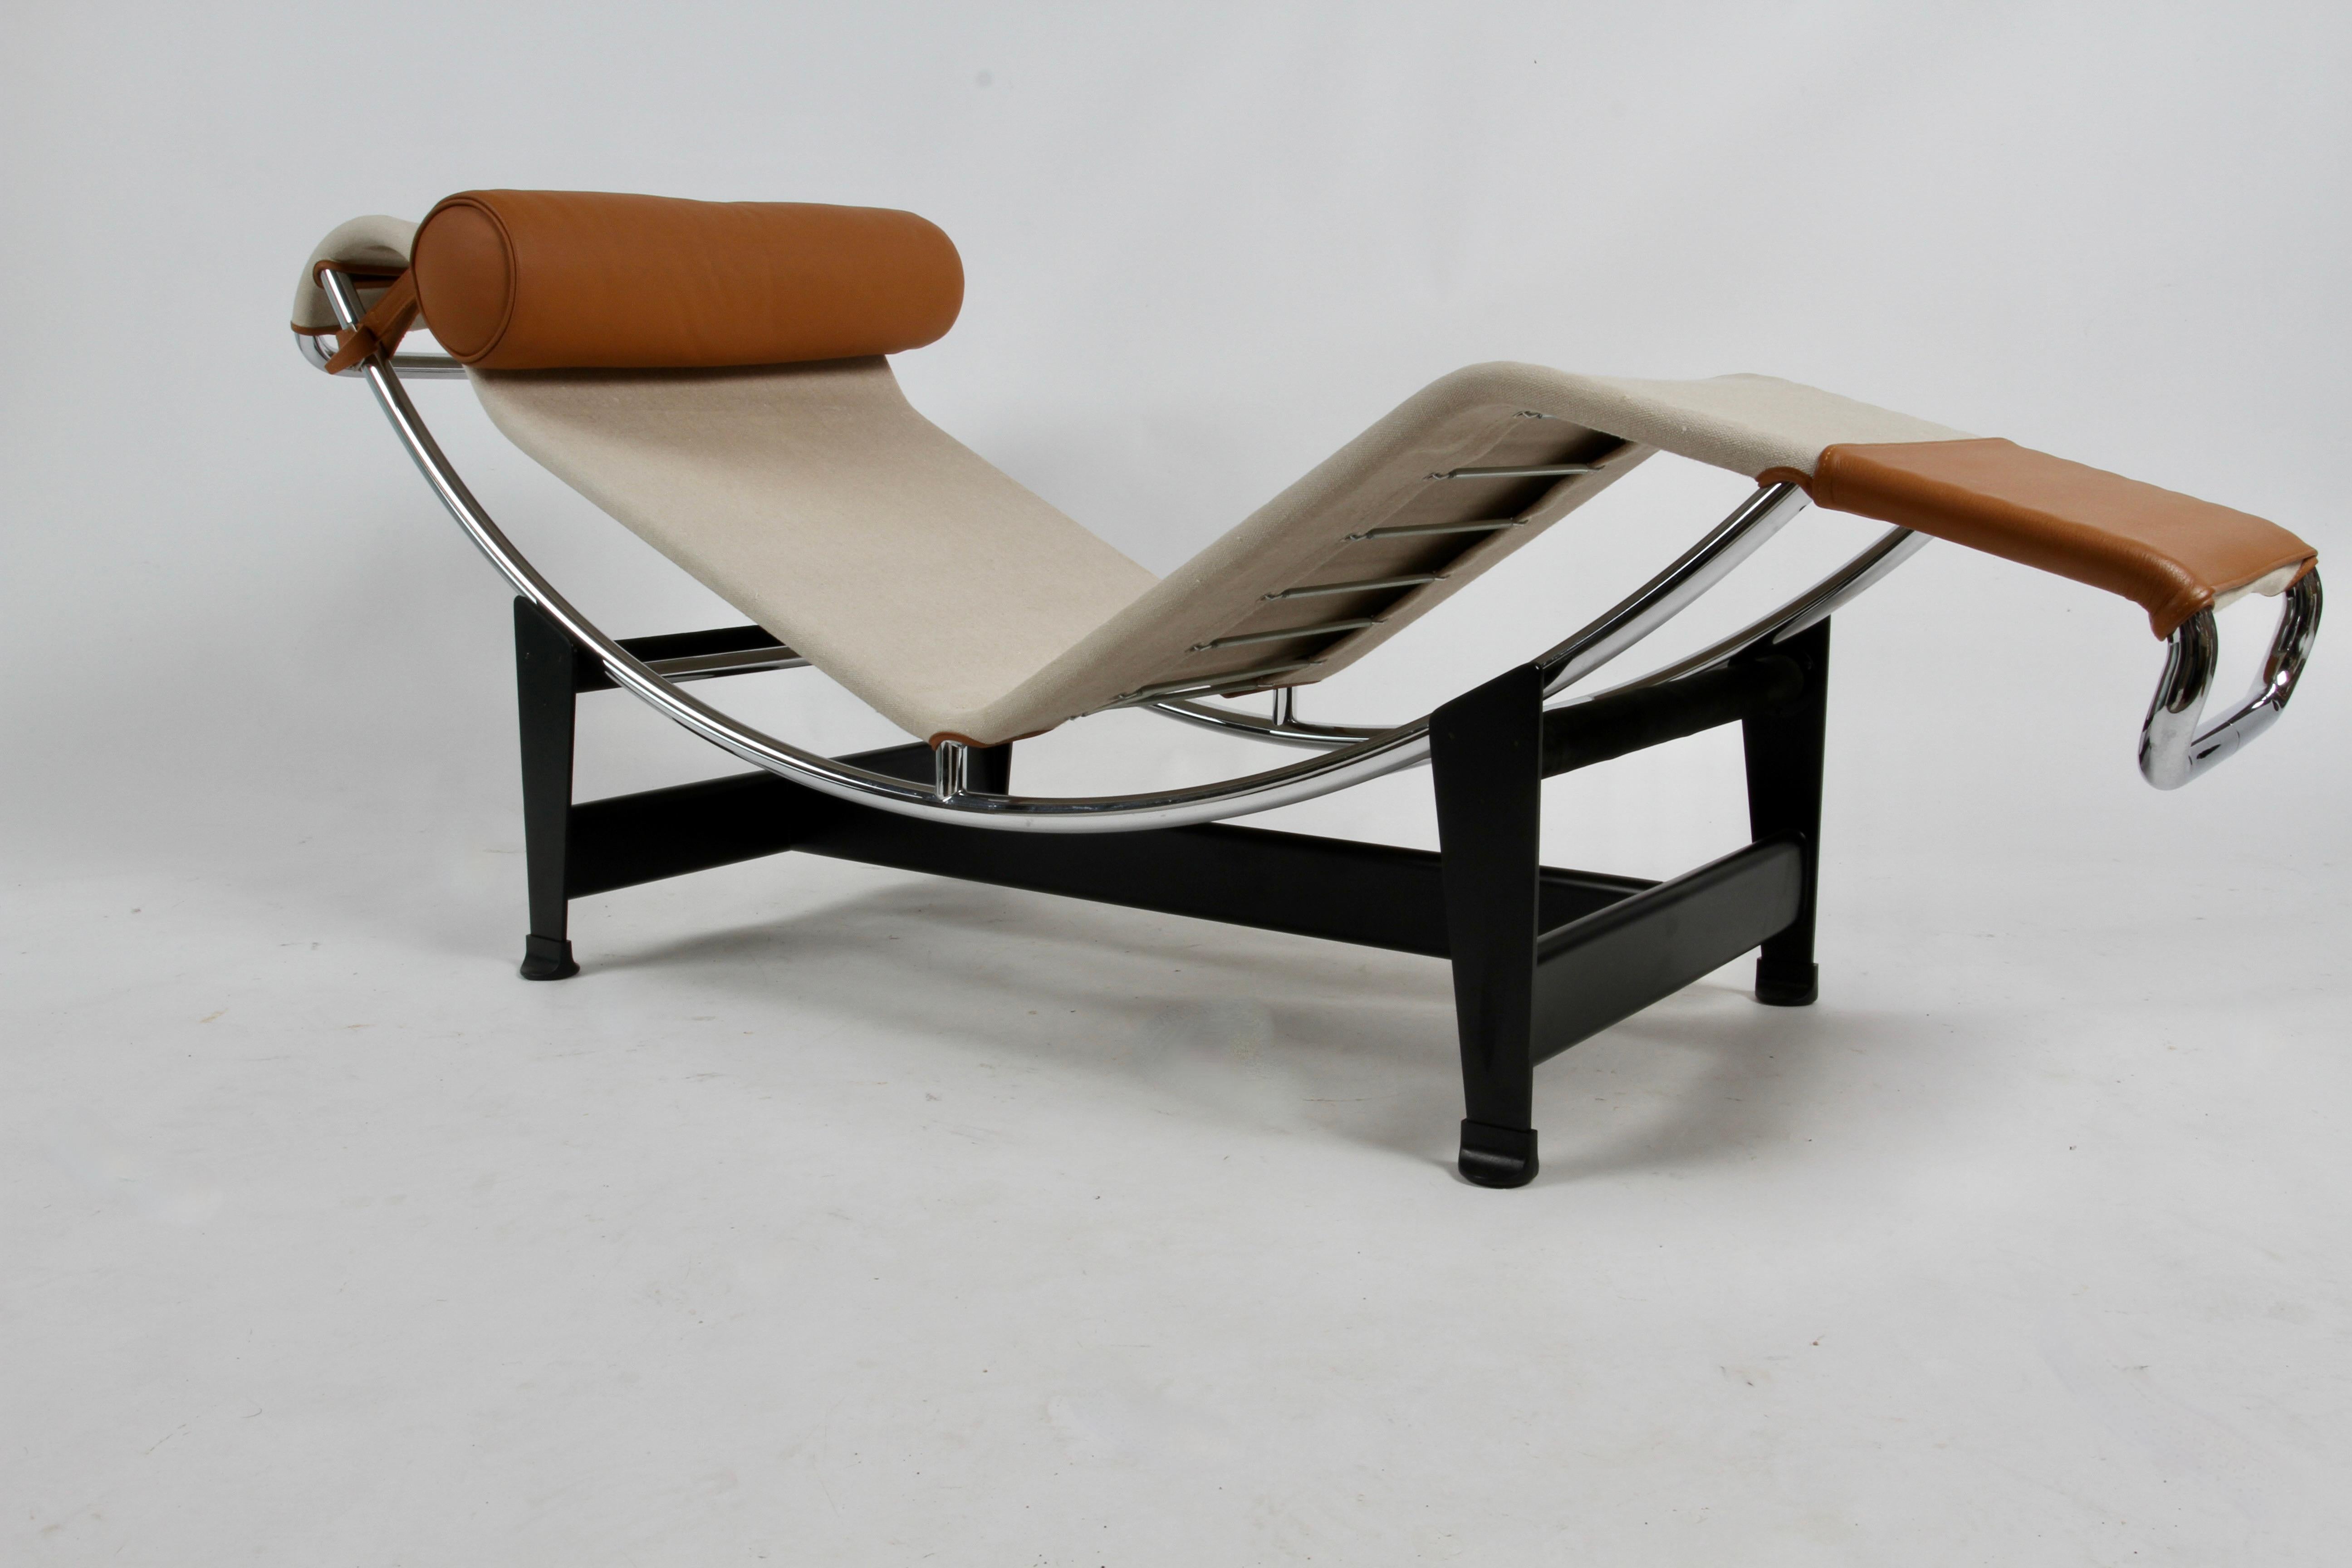 Late 20th Century Lc4 Chaise Lounge Canvas & Leather, Charlotte Perriand & Le Corbusier, Cassina